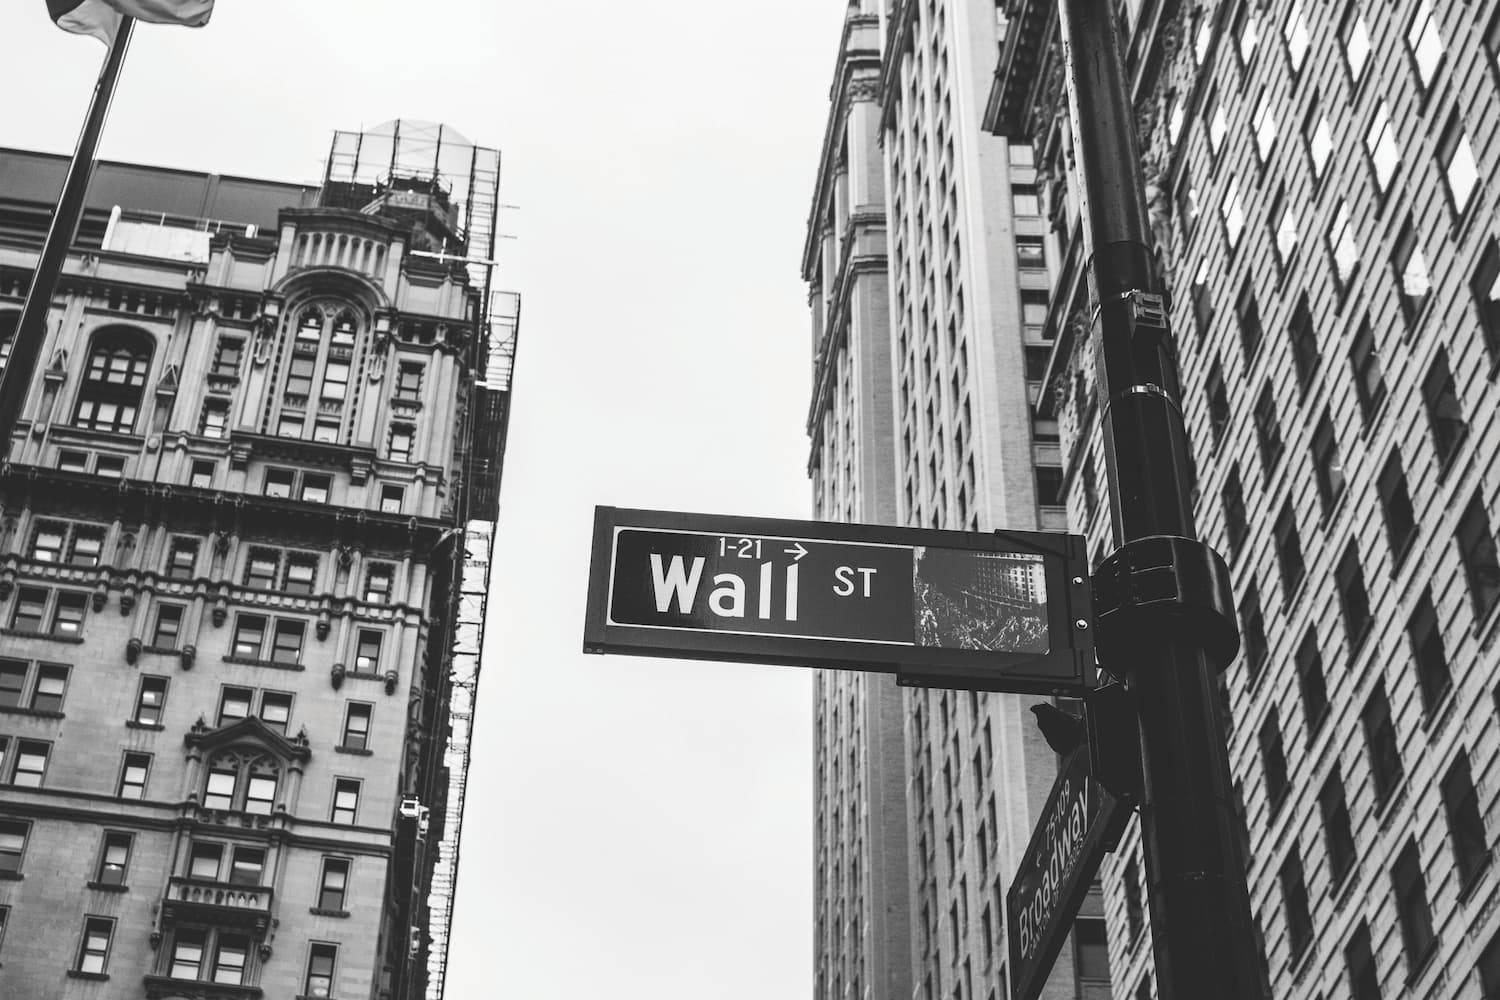 Wall st. 